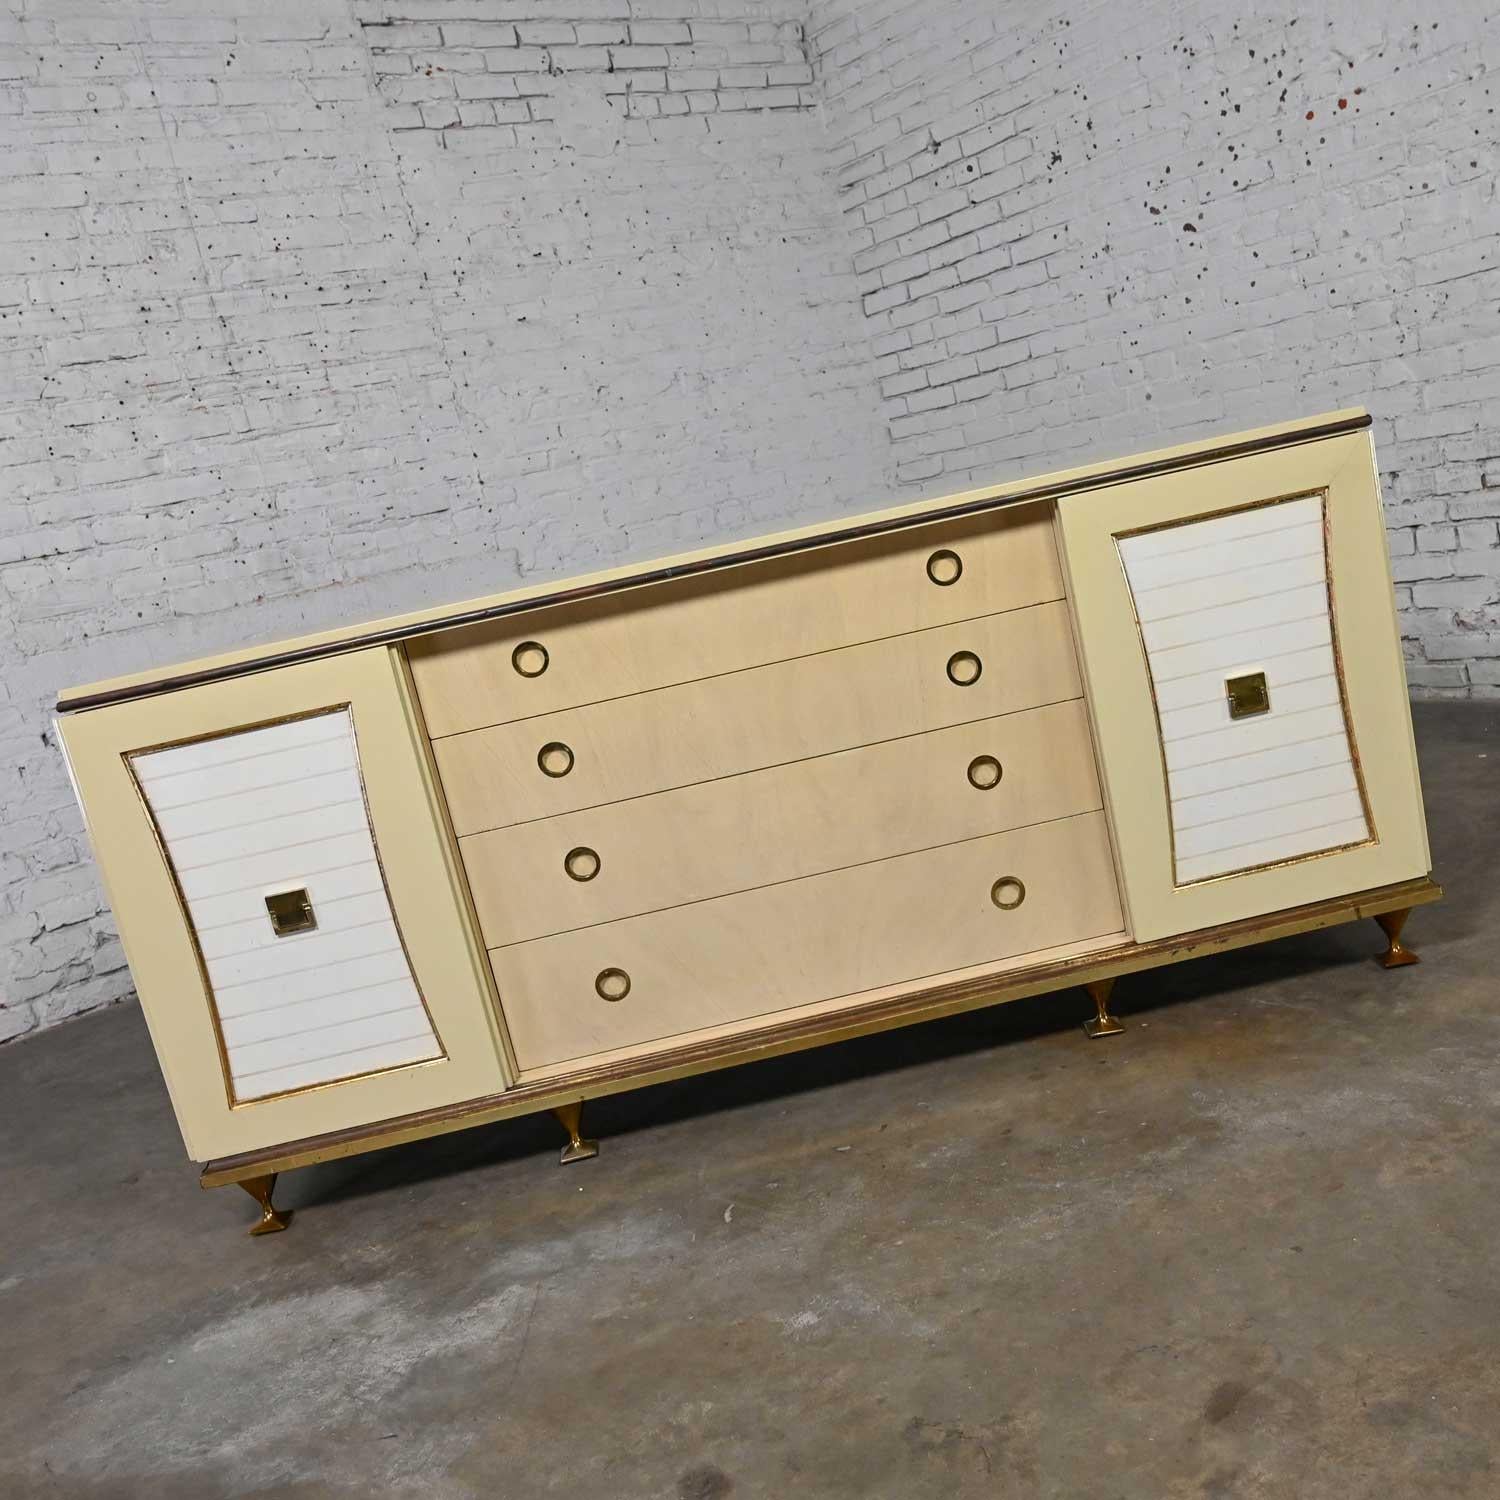 Metal Mid-20th Hollywood Regency Credenza or Dresser by Renzo Rutili for Johnson Furn For Sale